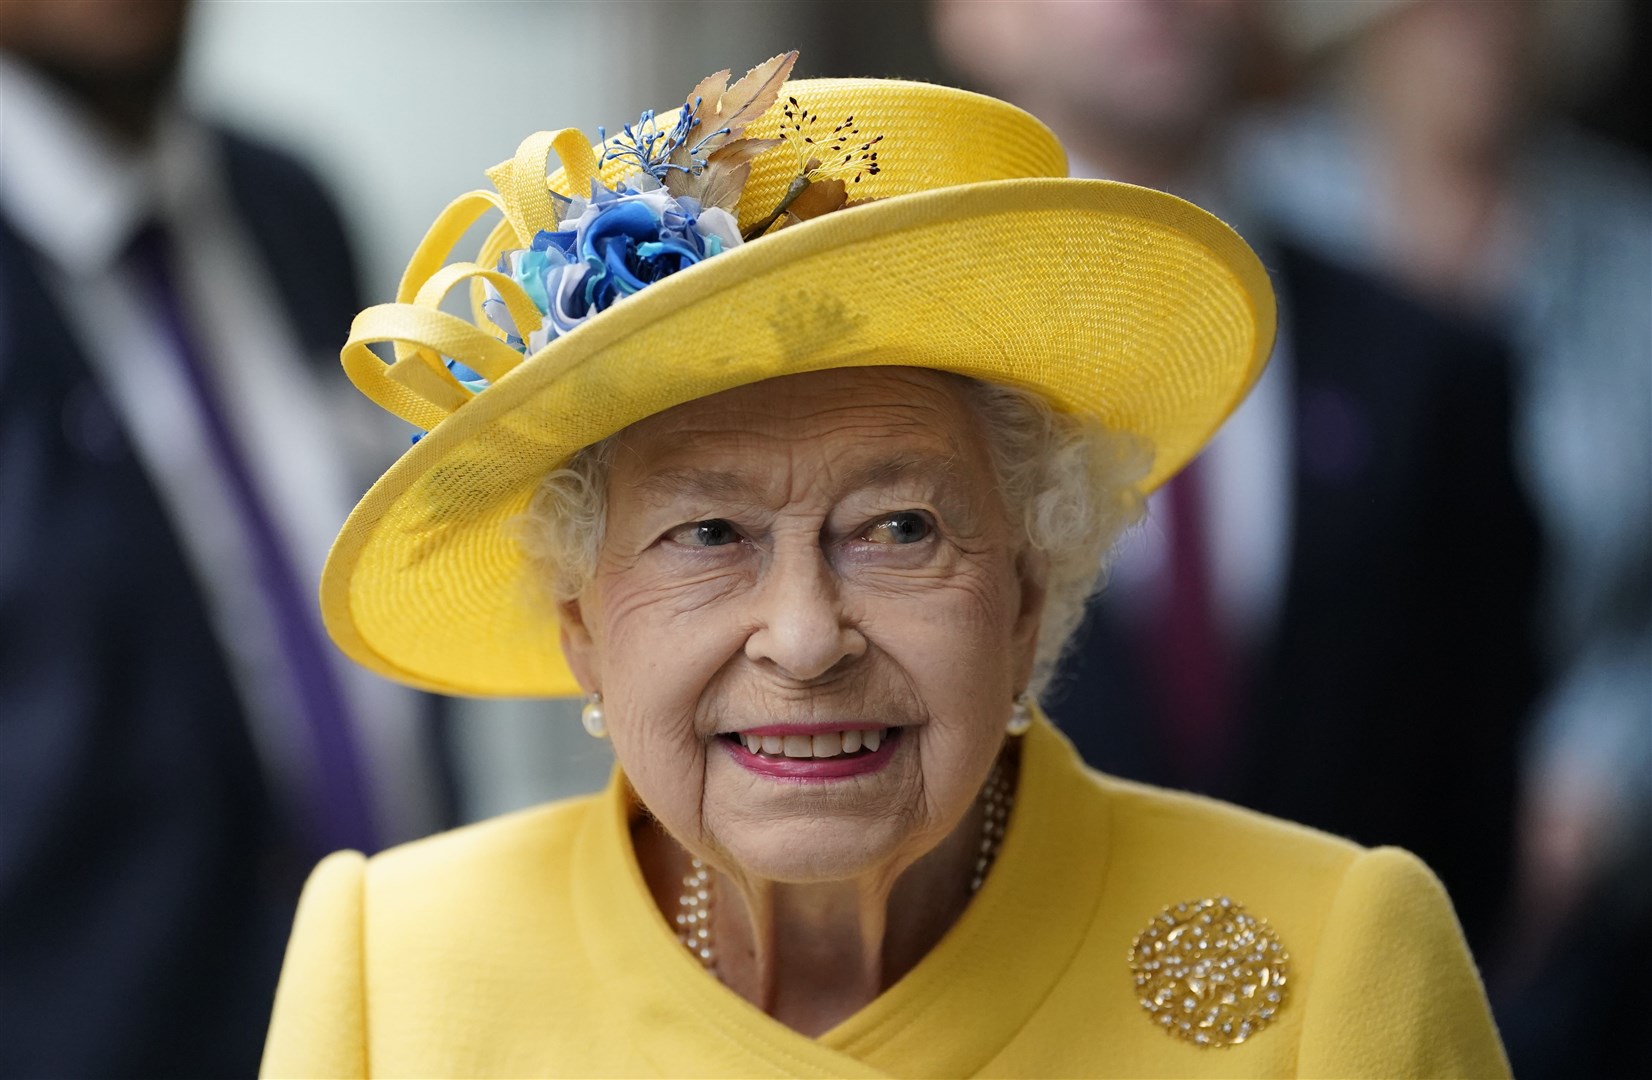 The Queen is ‘probably the most trusted person in the country’, Justin Welby said (Andrew Matthews/PA)